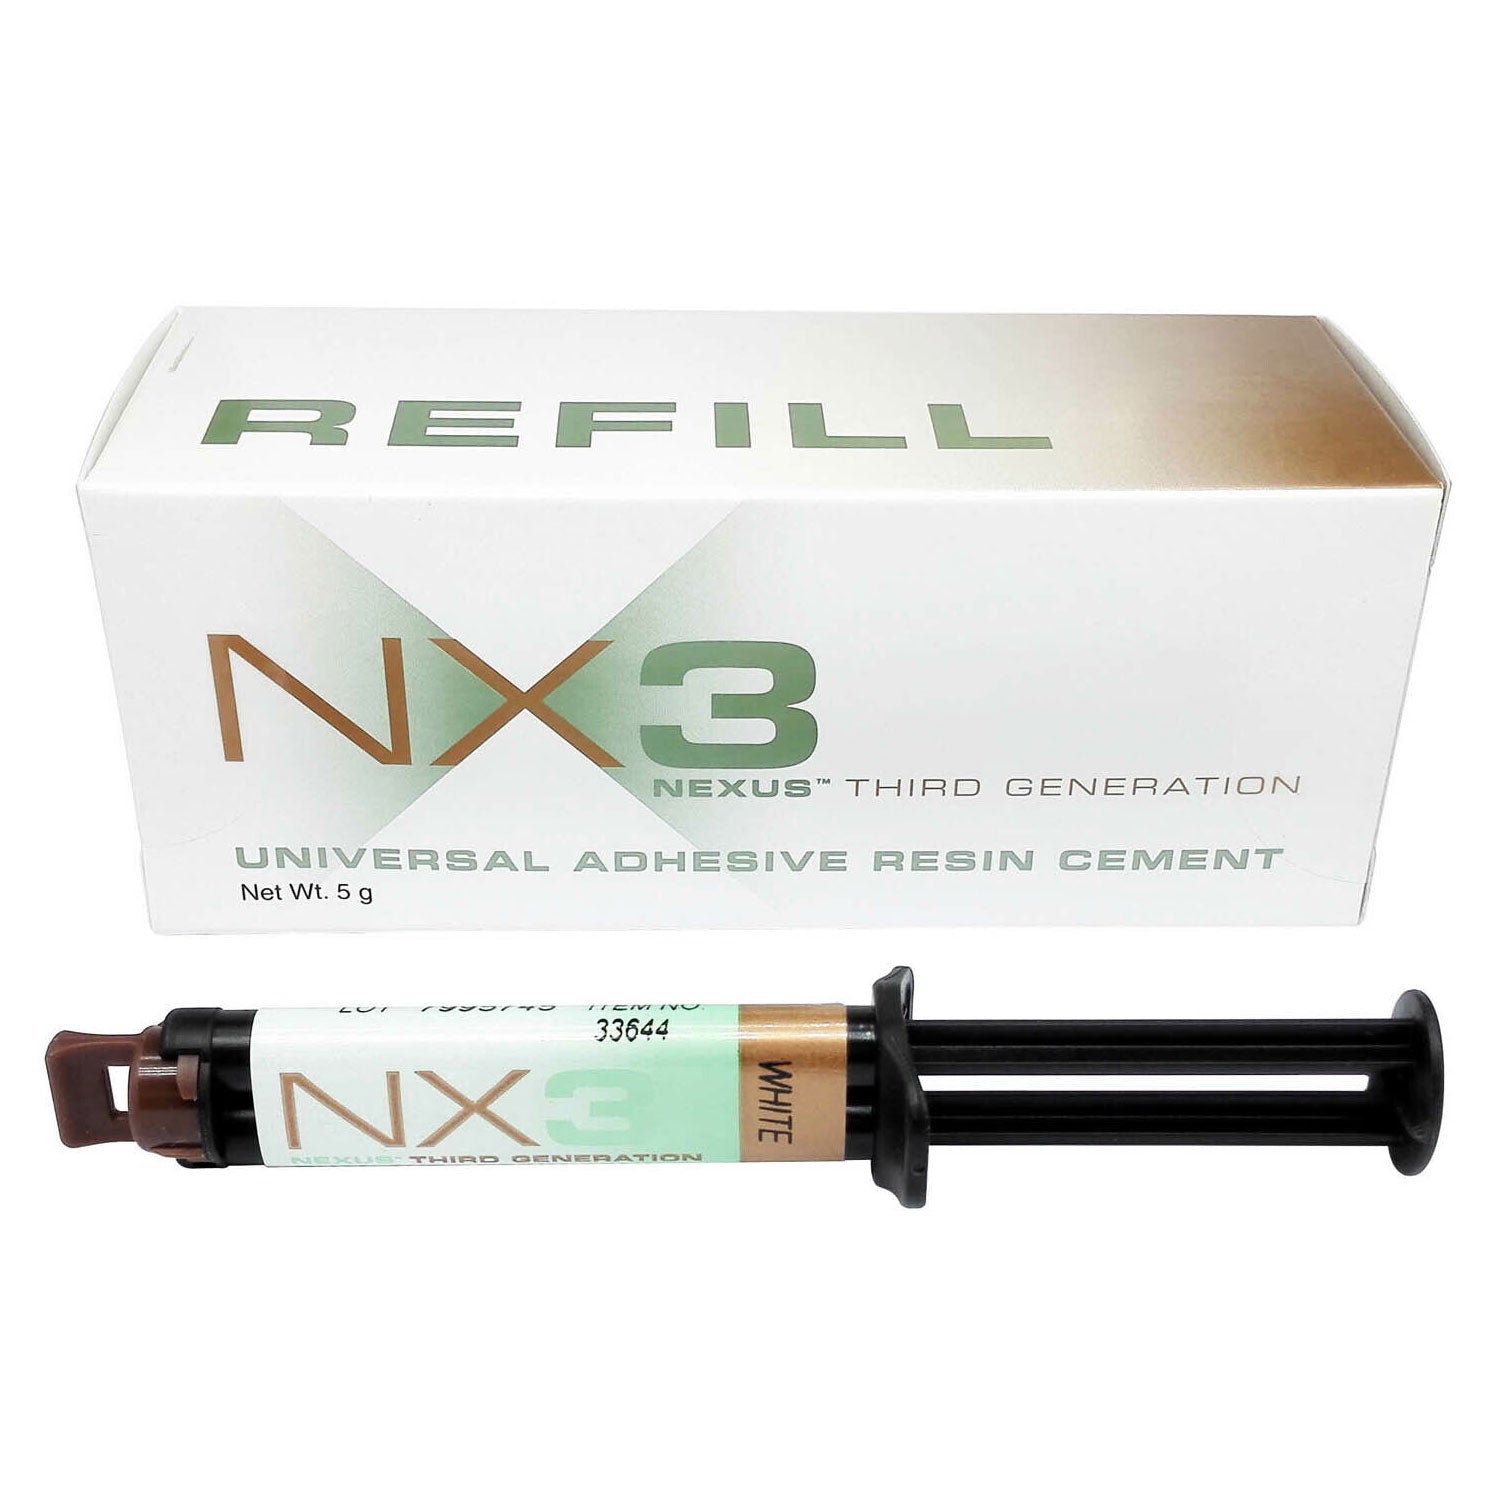 kerr-nx3-dual-cure-refill-automix-dental-syringe-resin-cement